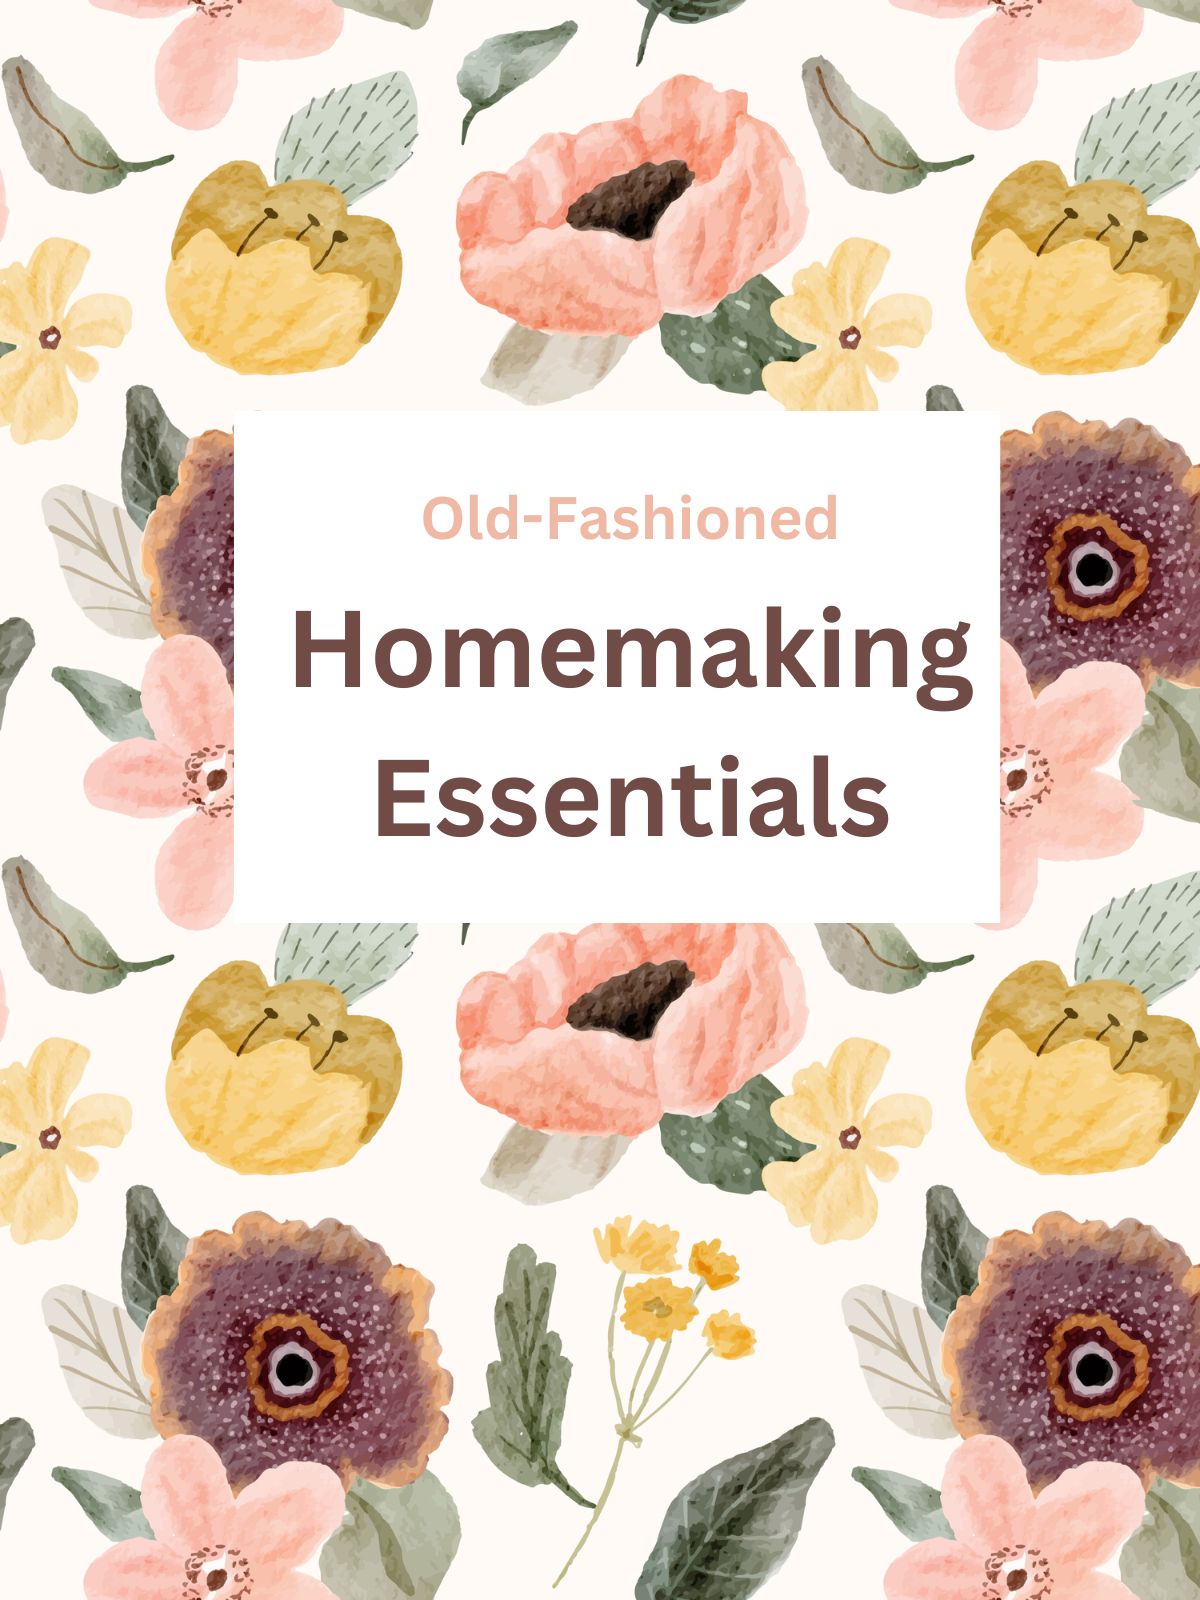 Floral Background with text "Old-Fashioned Homemaking Essentials"